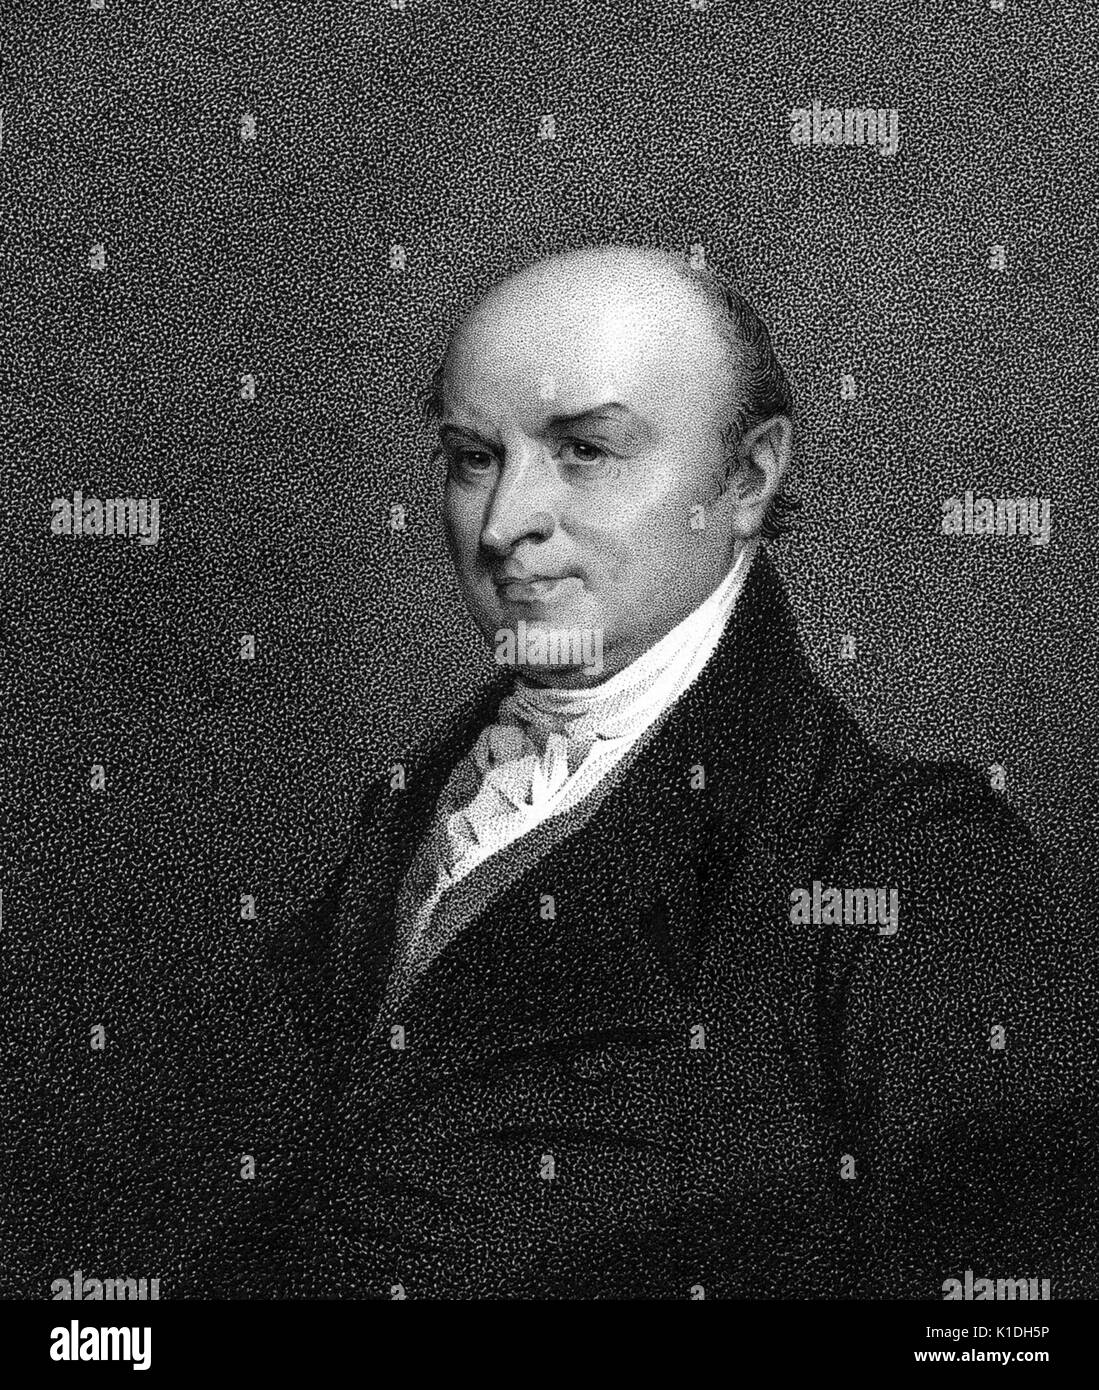 Sixth President of the United States John Quincy Adams, 1900. From the New York Public Library. Stock Photo